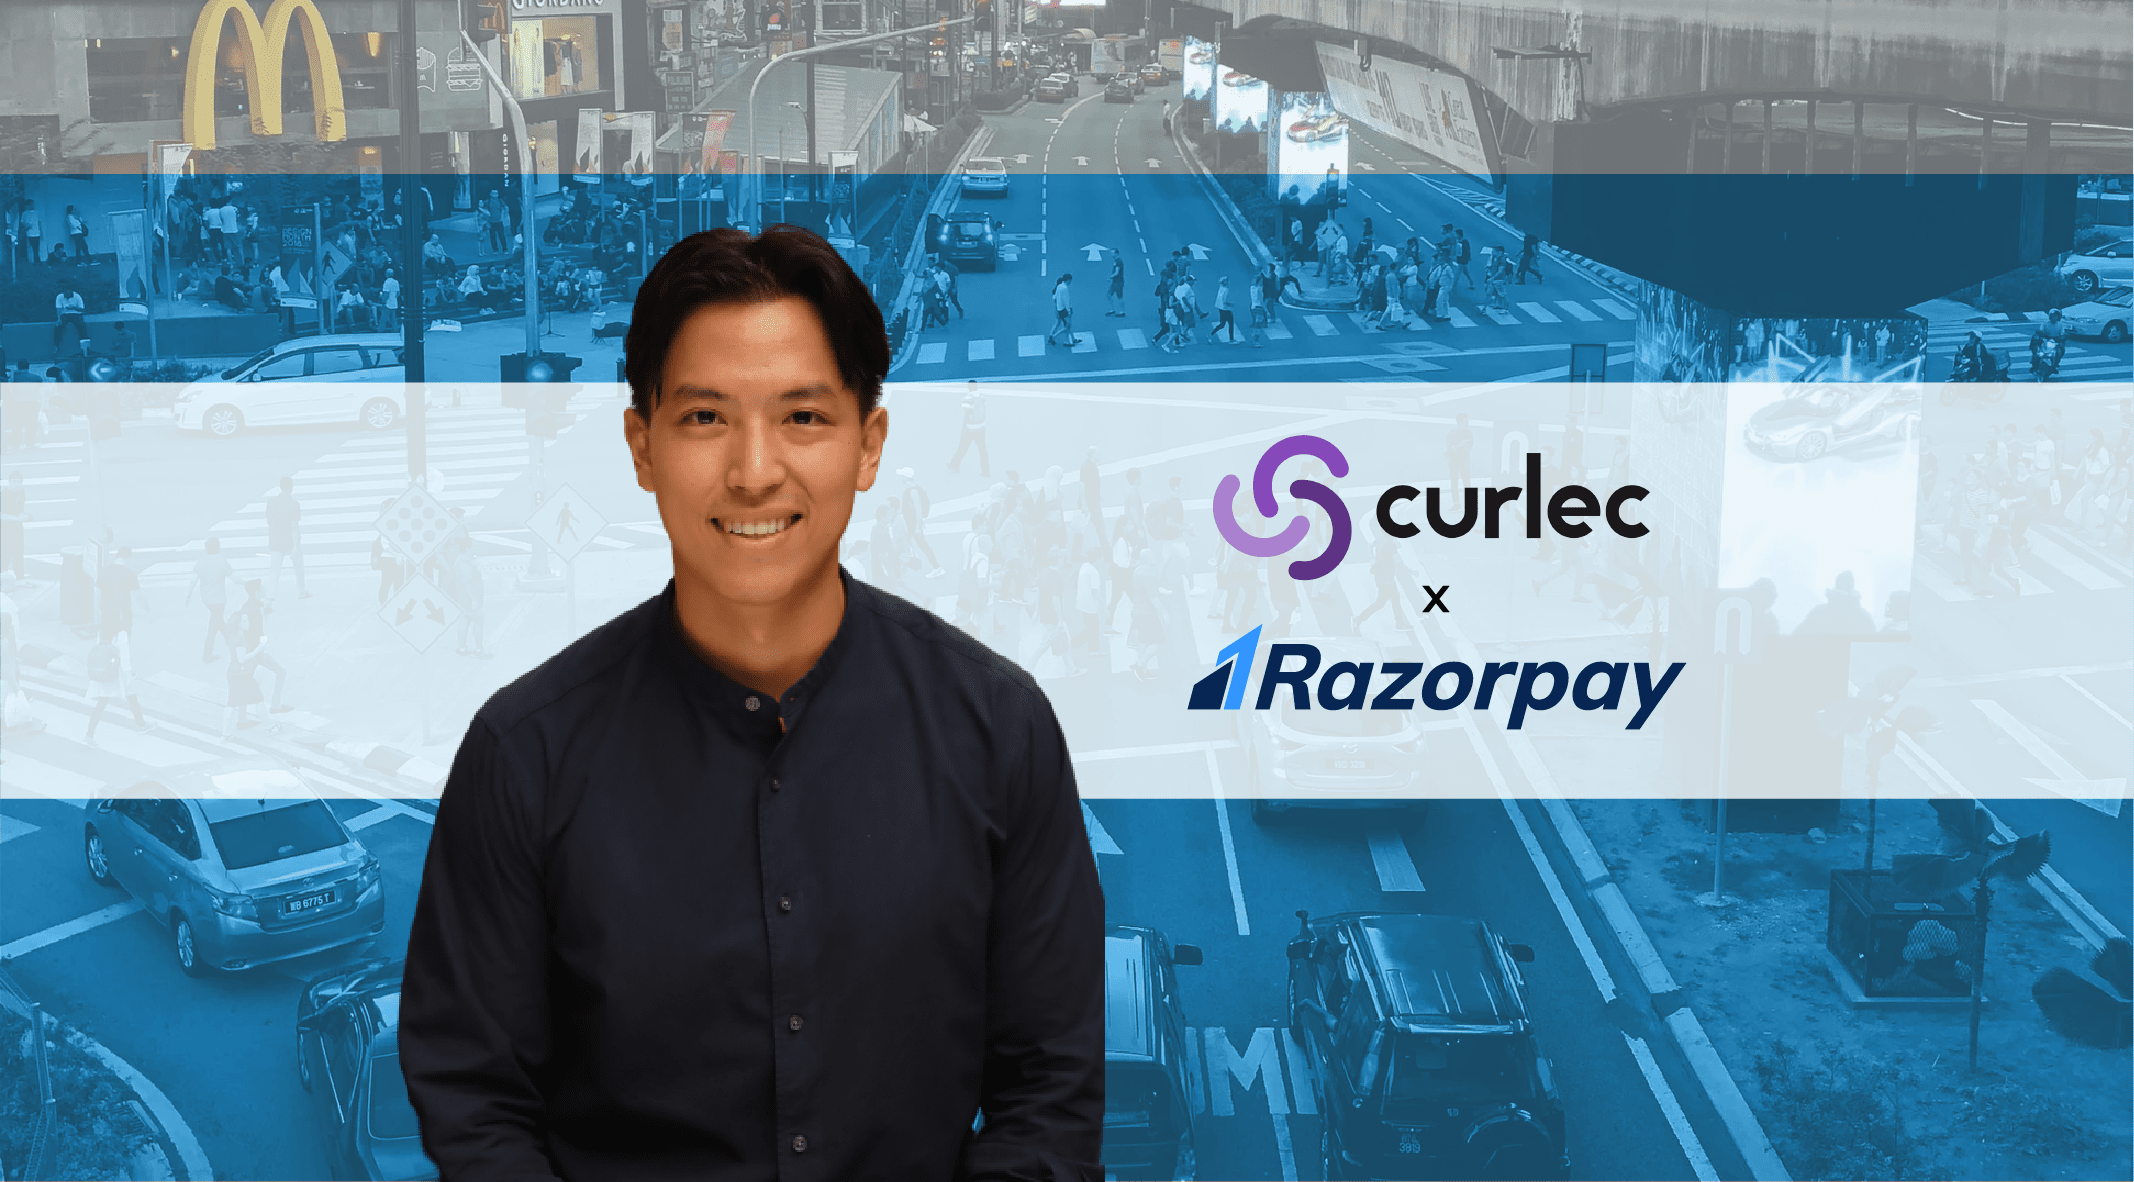 India’s Razorpay Acquires Majority Stake in Payments Firm Curlec